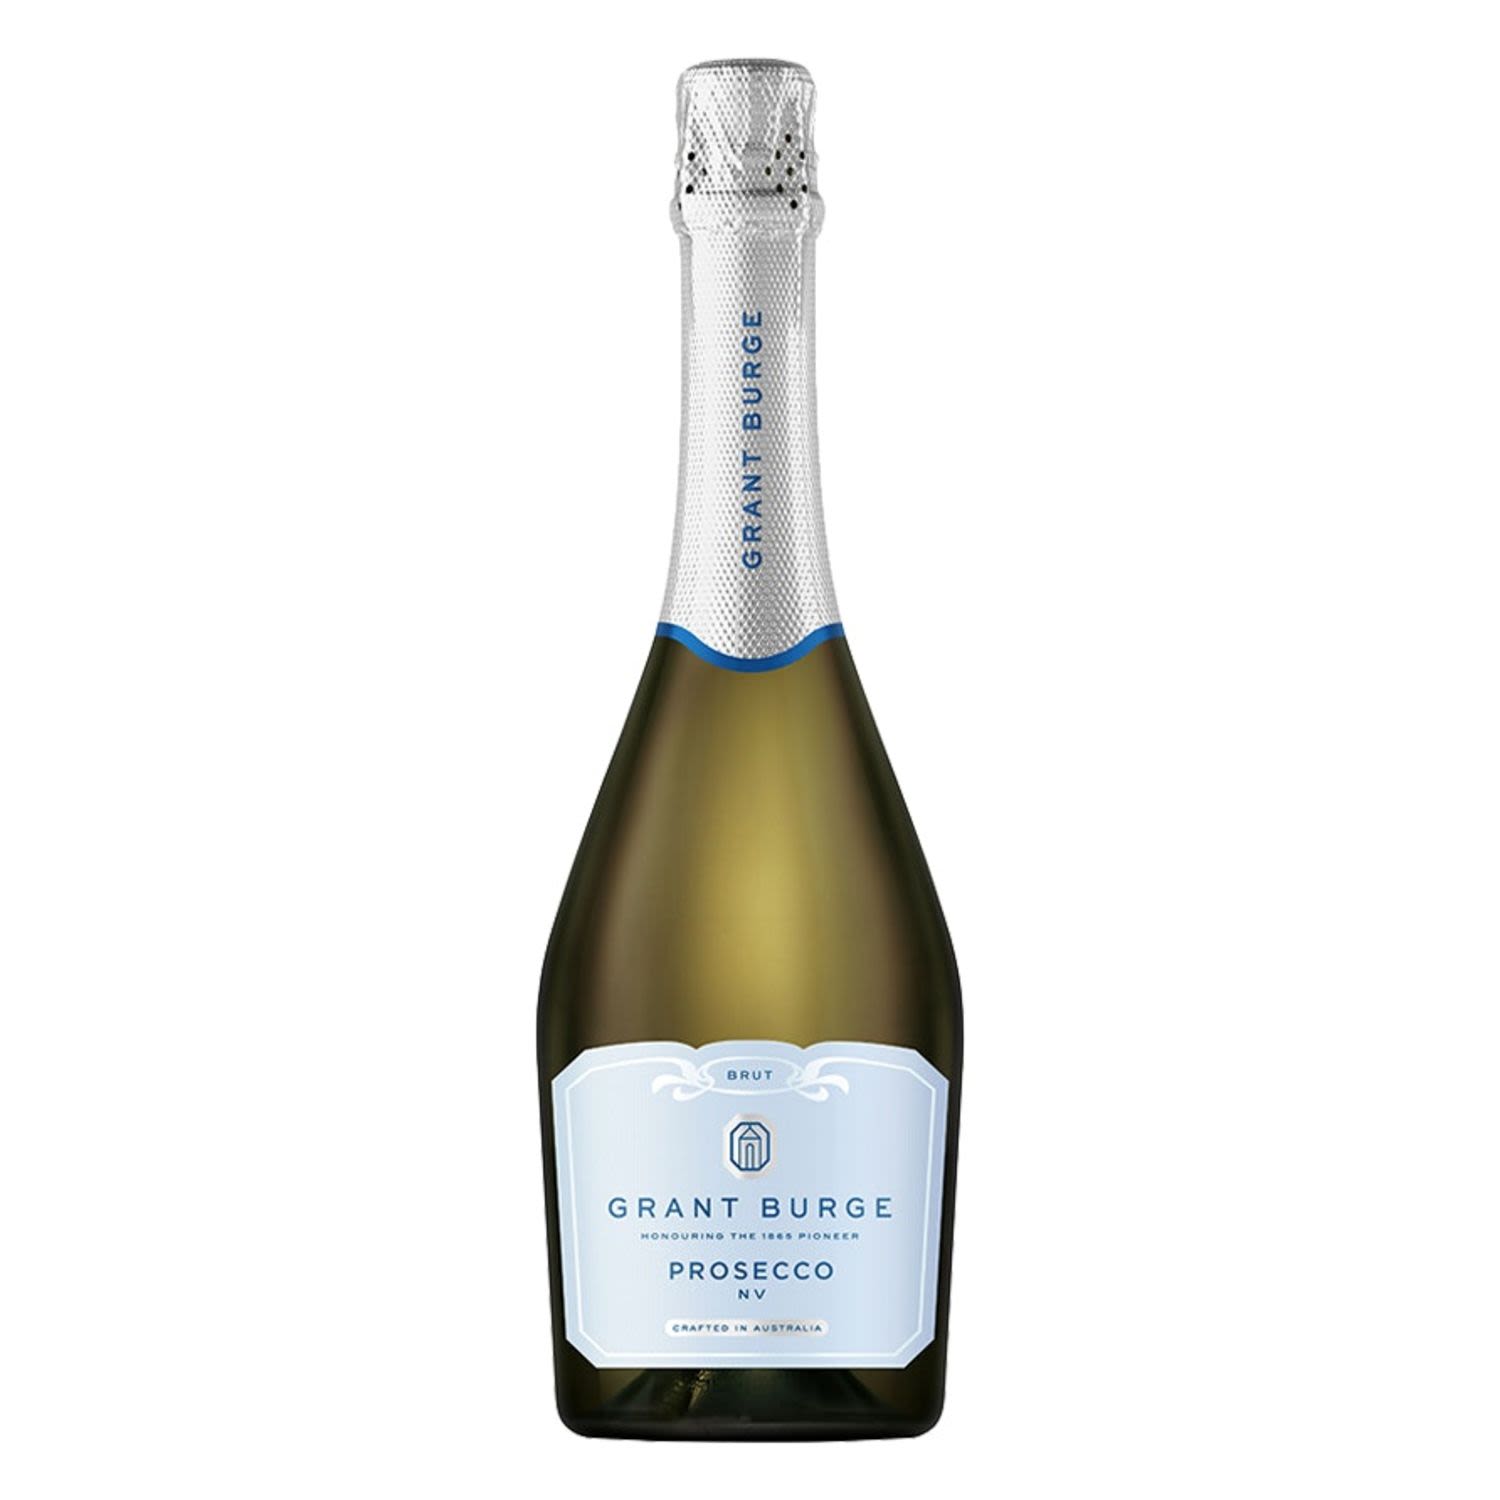 Grant Burge Prosecco shows lively fresh fruit flavours of white peach, pistachio and nectarine with a slightly sweet honeysuckle finish.<br /> <br />Alcohol Volume: 11.50%<br /><br />Pack Format: Bottle<br /><br />Standard Drinks: 7.1</br /><br />Pack Type: Bottle<br /><br />Country of Origin: Australia<br /><br />Region: South Eastern Australia<br /><br />Vintage: Non Vintage<br />